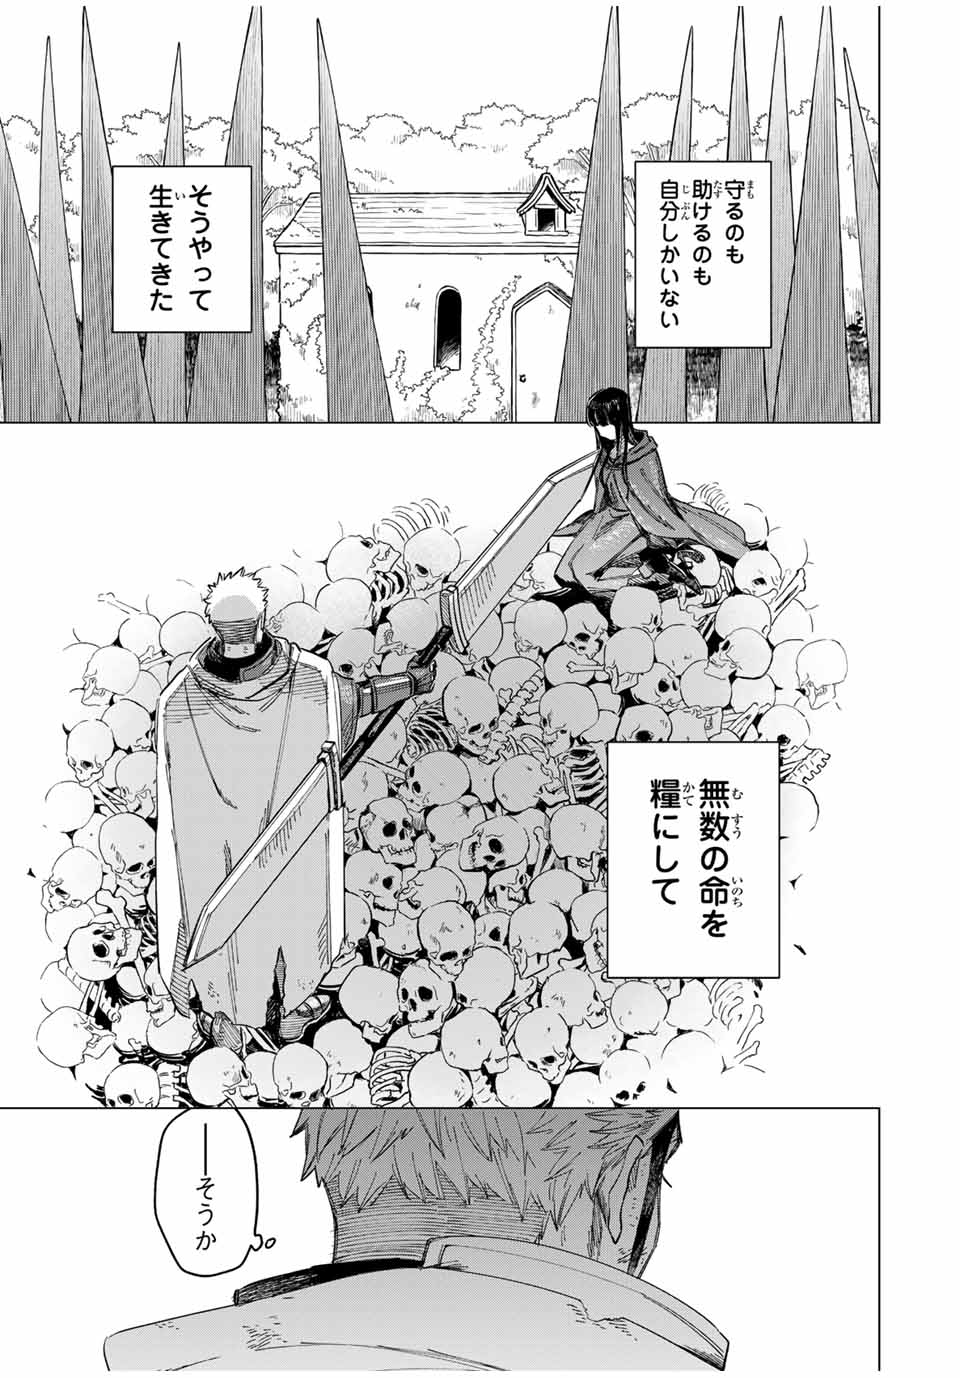 Witch and Mercenary 魔女と傭兵 第1.3話 - Page 1